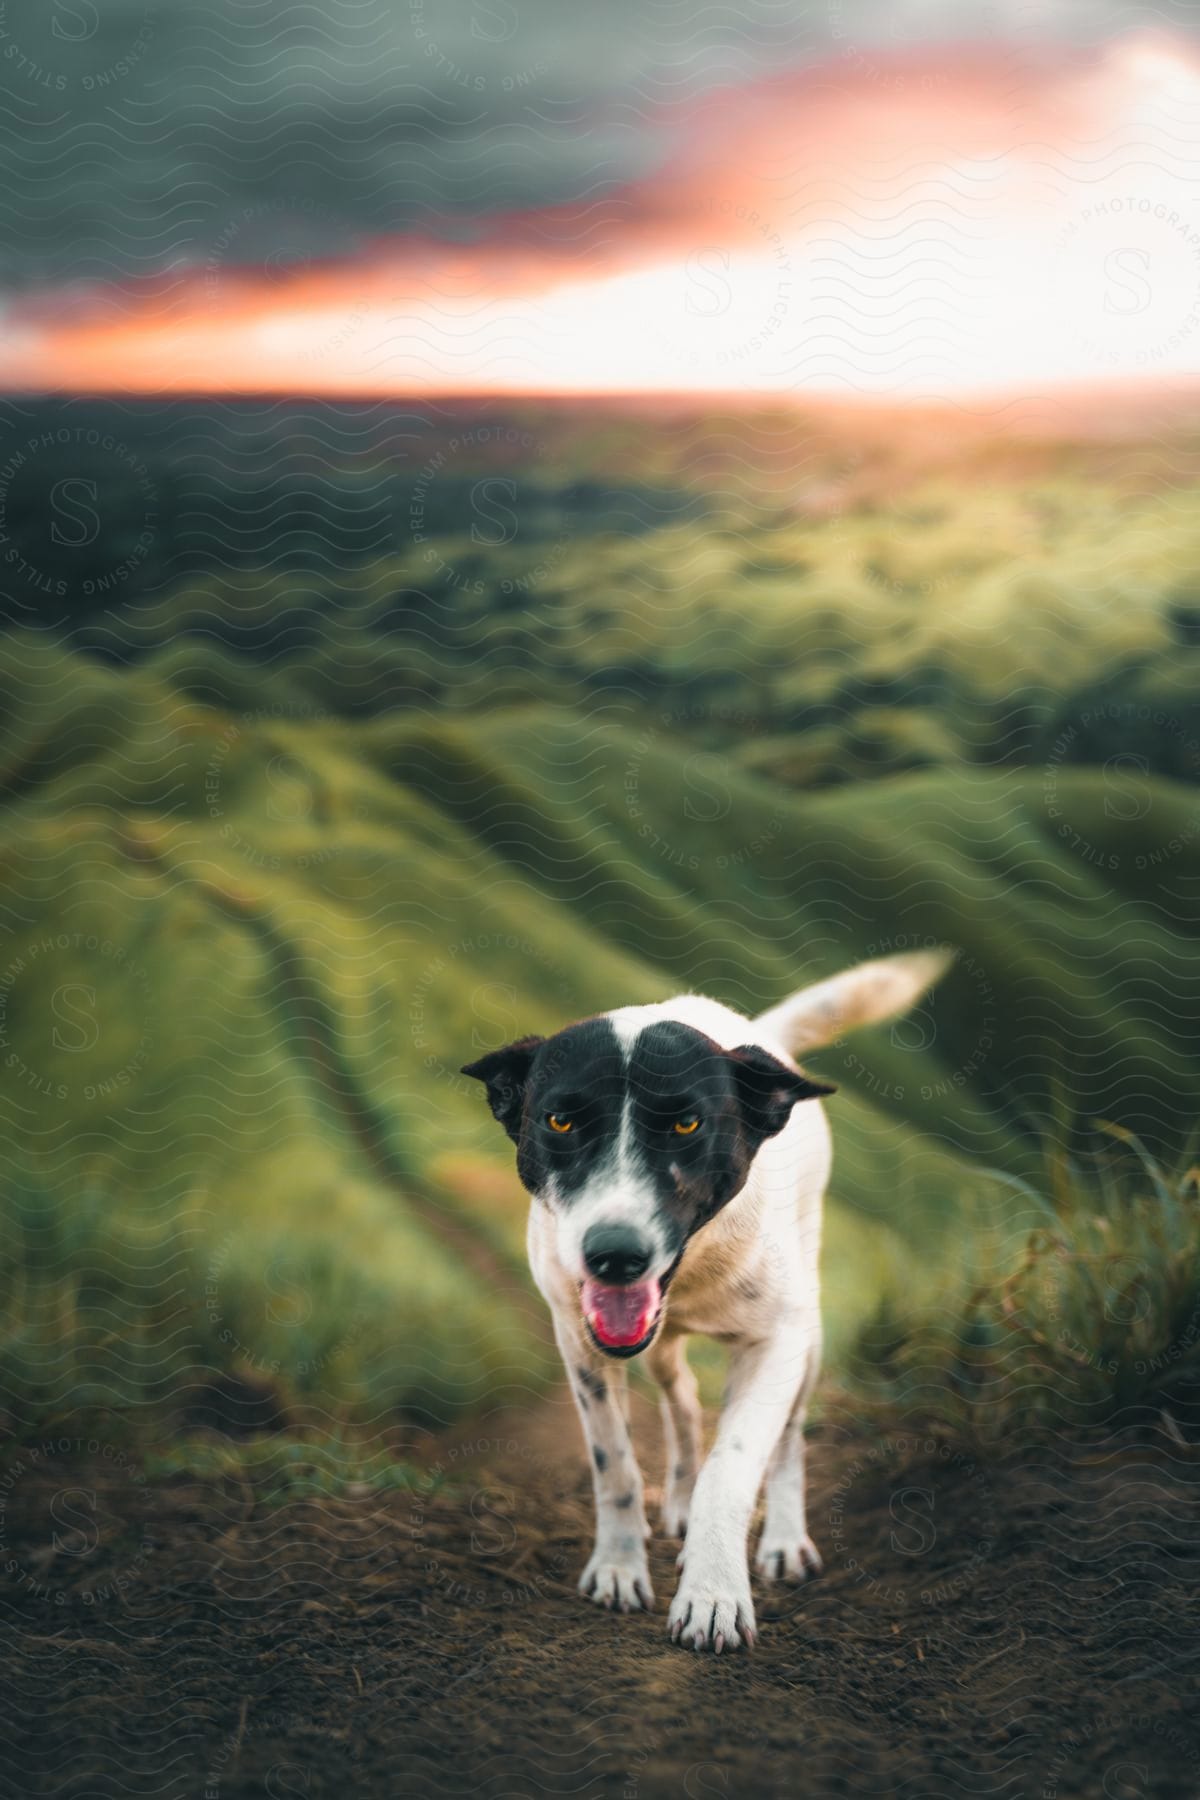 A dog stands on a hilltop with hills and mountains in the distance